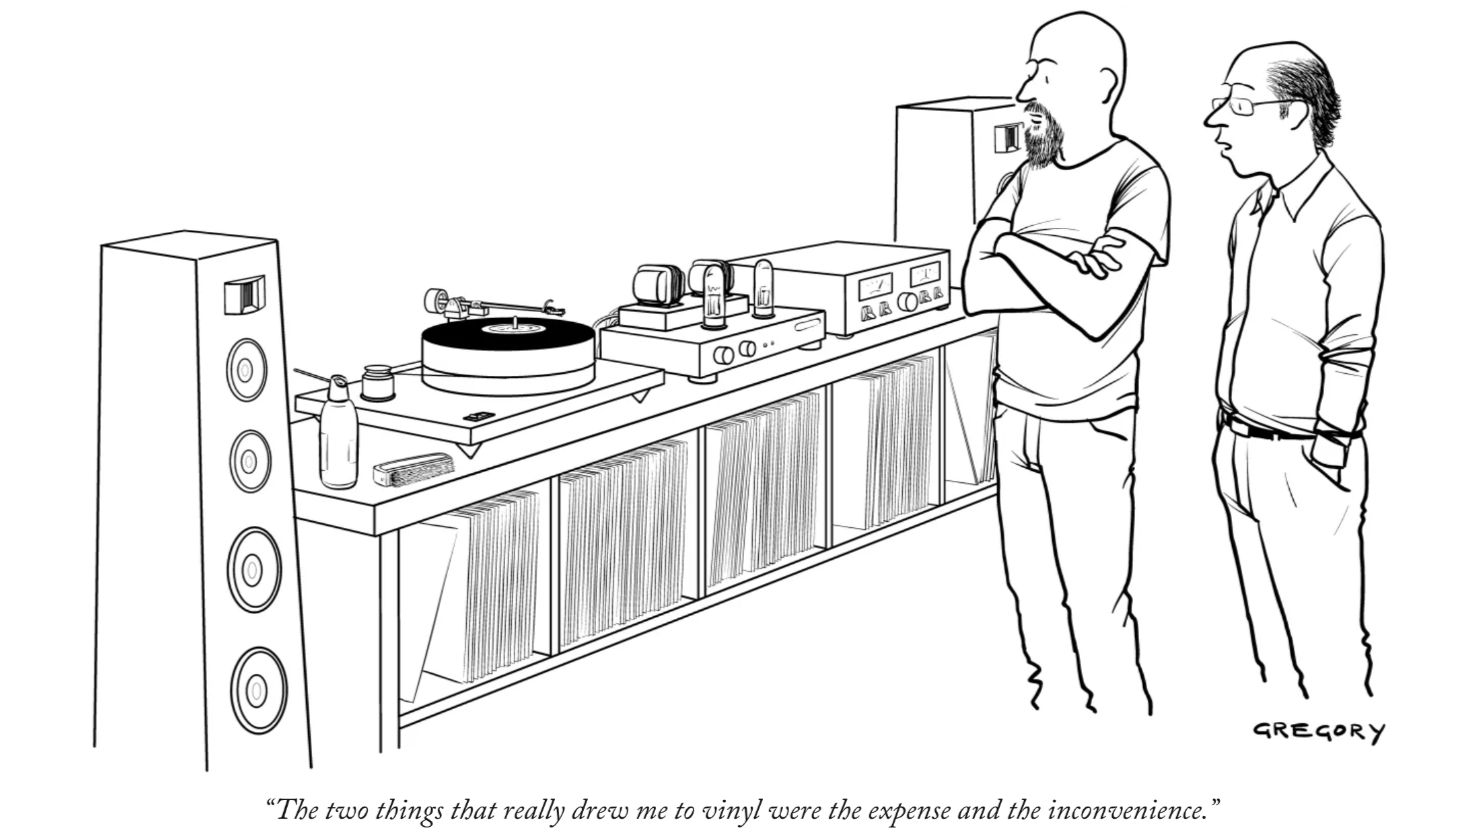 i would love to have a turntable system at home, but there are two things stopping me